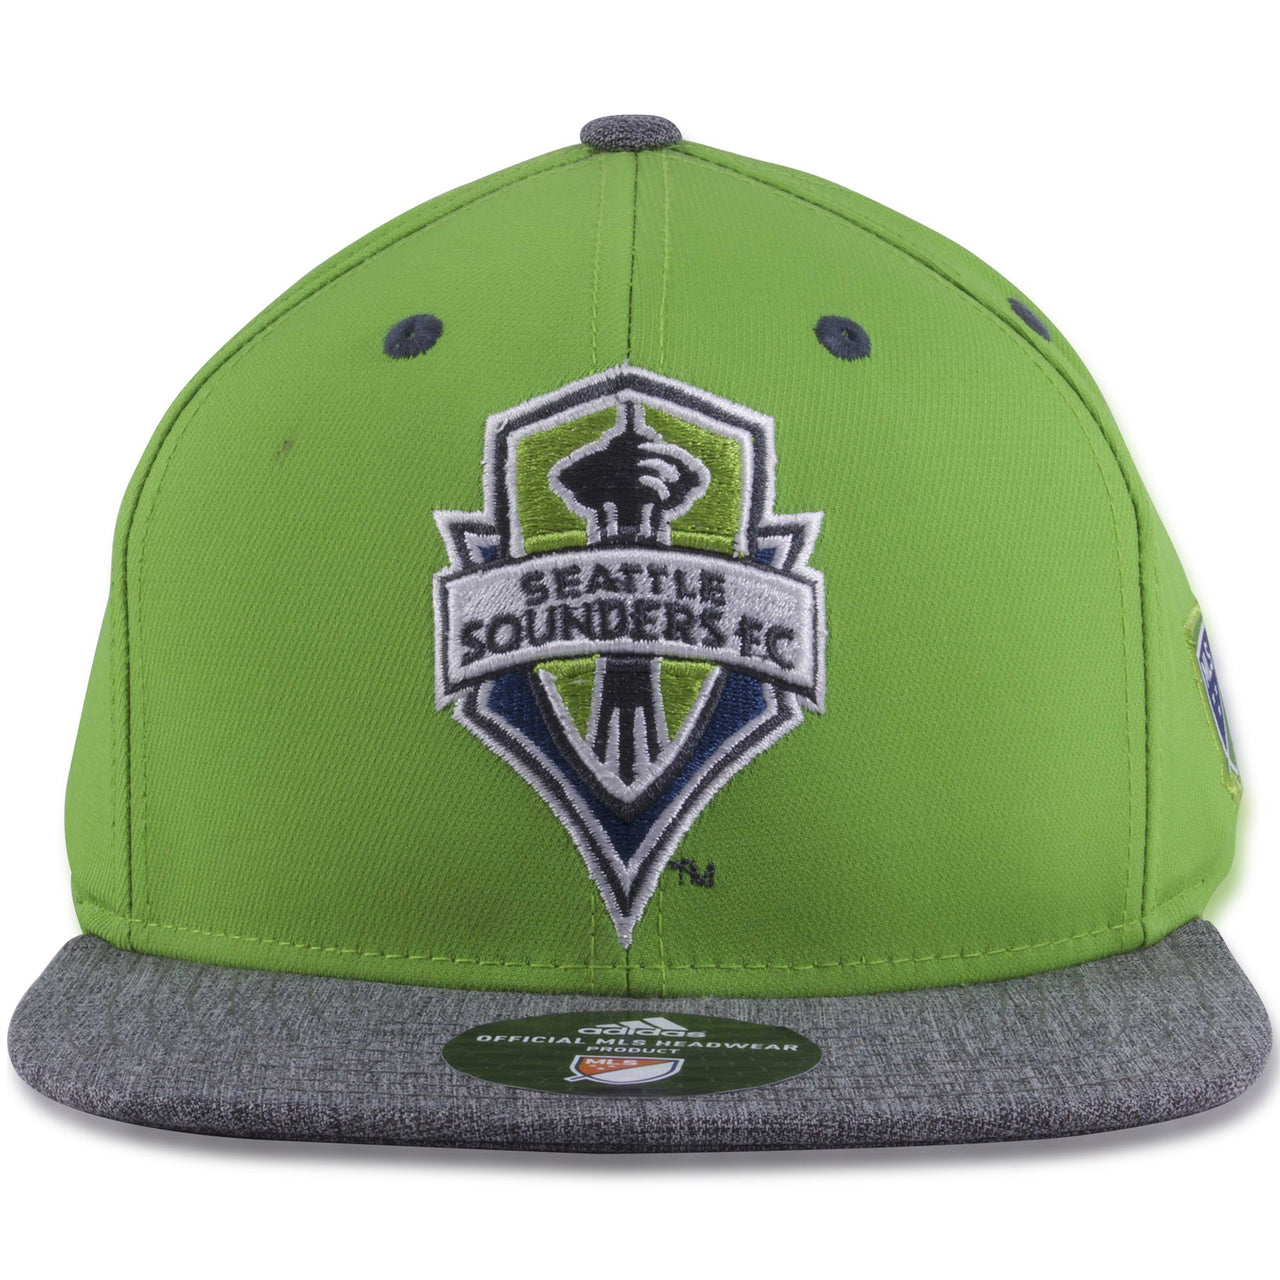 Seattle Sounders FC Two Tone Green on Gray Adidas Snapback Hat